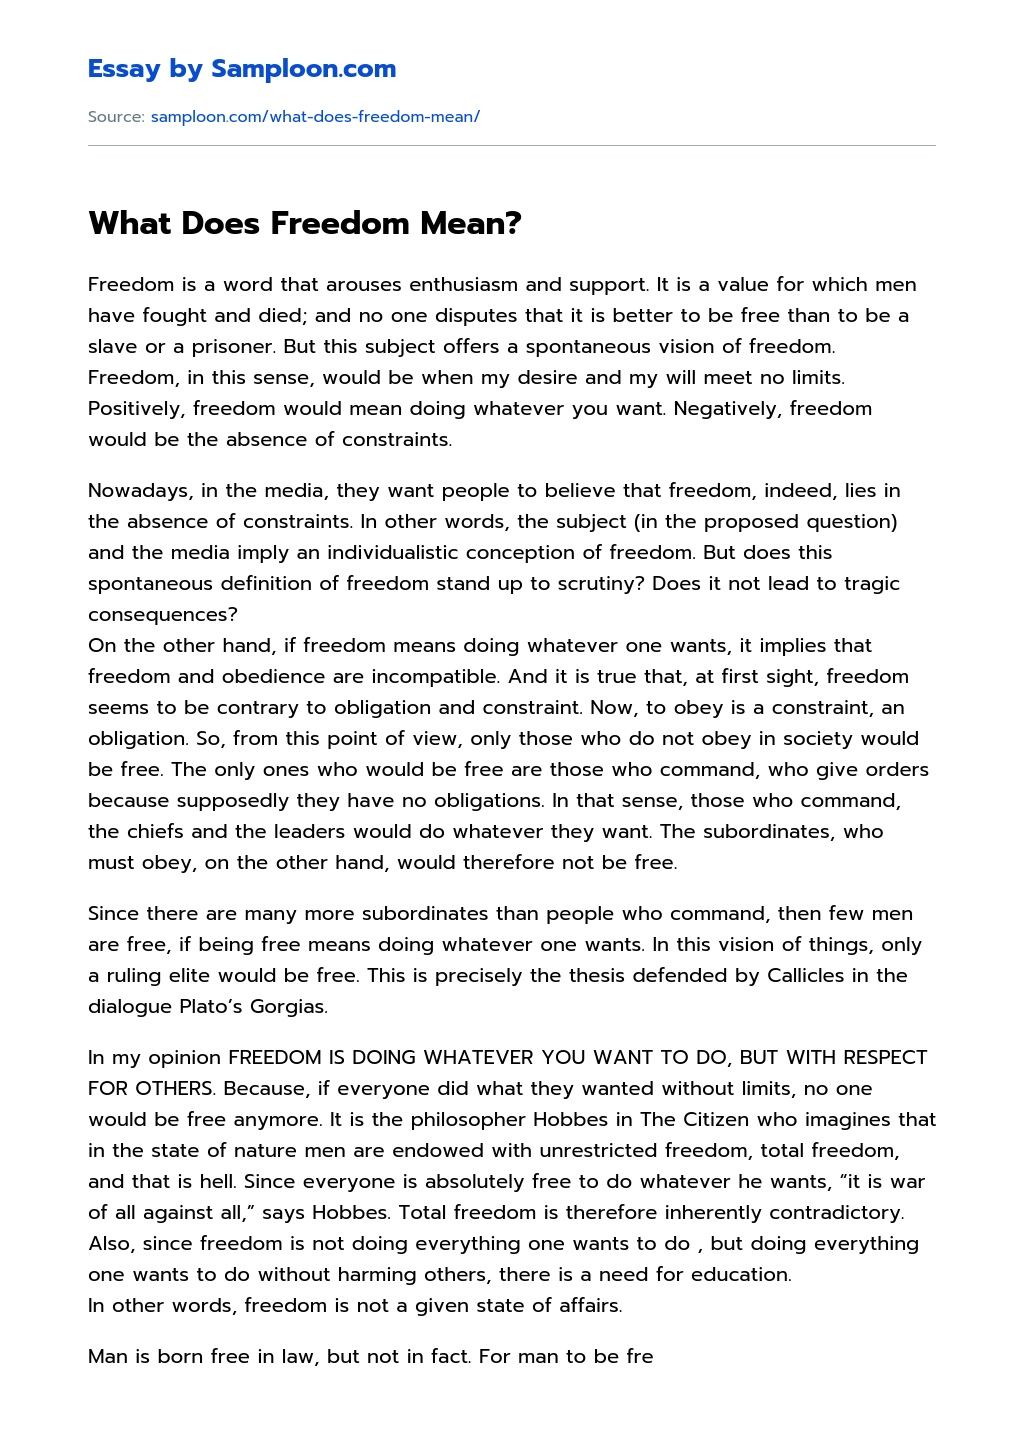 What Does Freedom Mean? essay